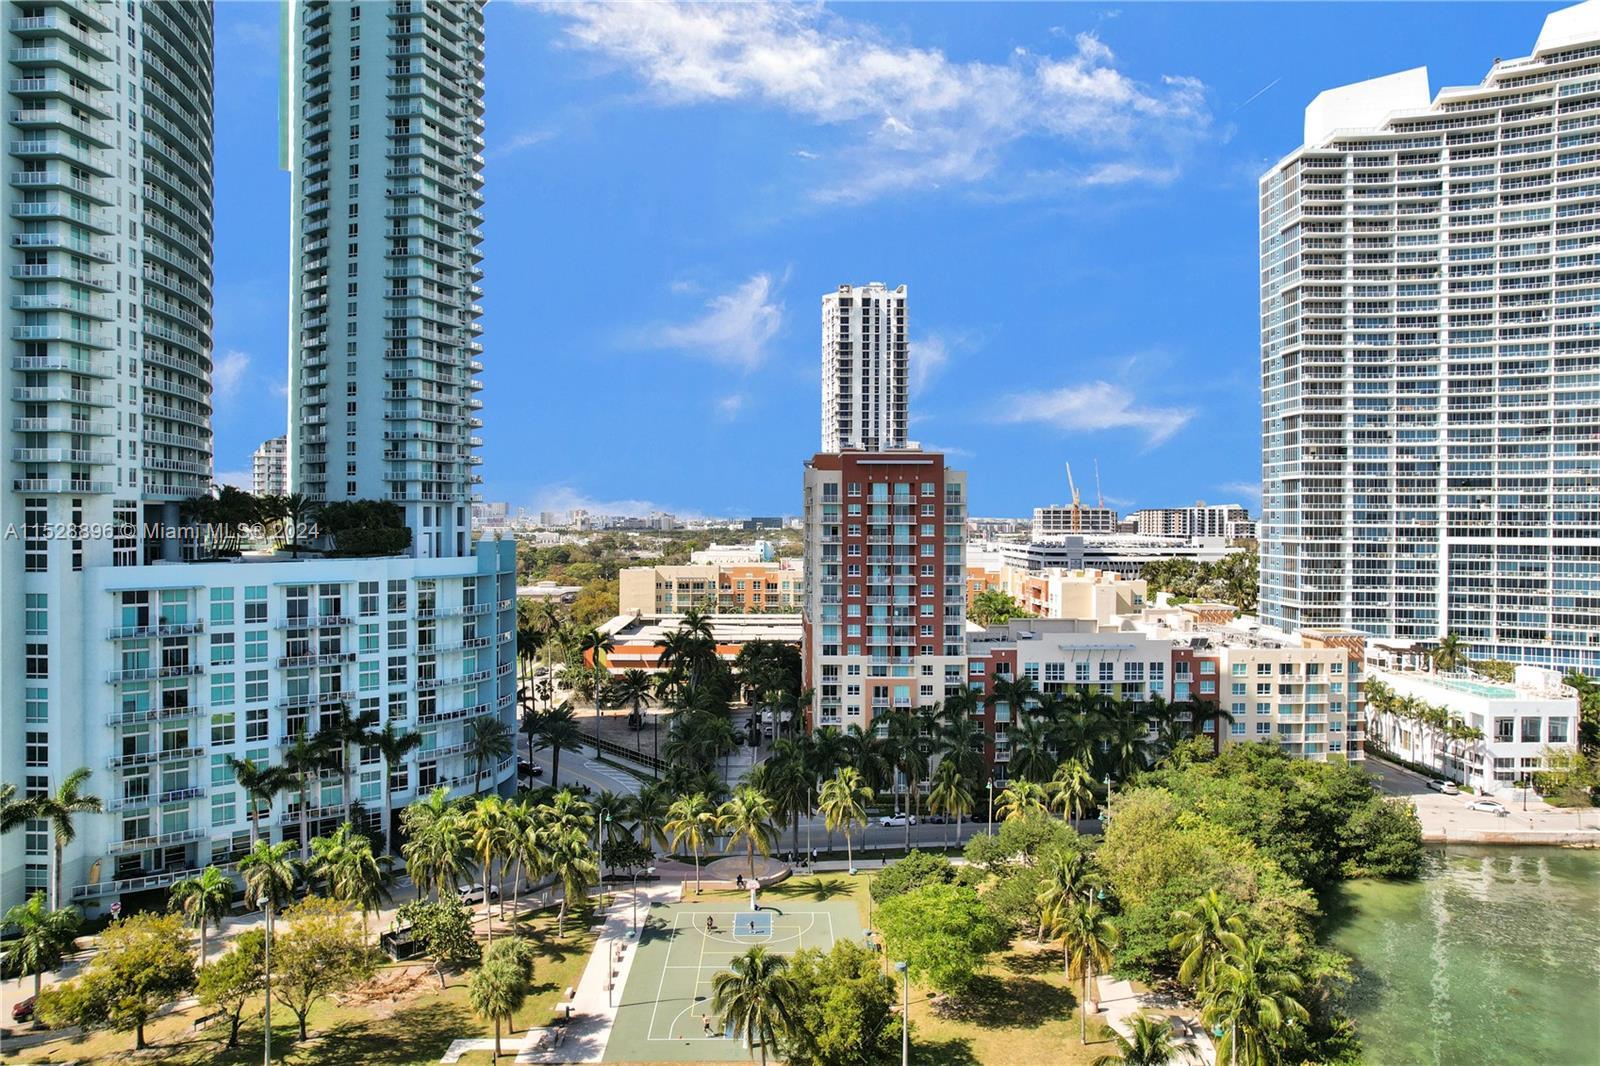 Full-service building with resort-style amenities in Edgewater, one of Miami's most popular neighbor